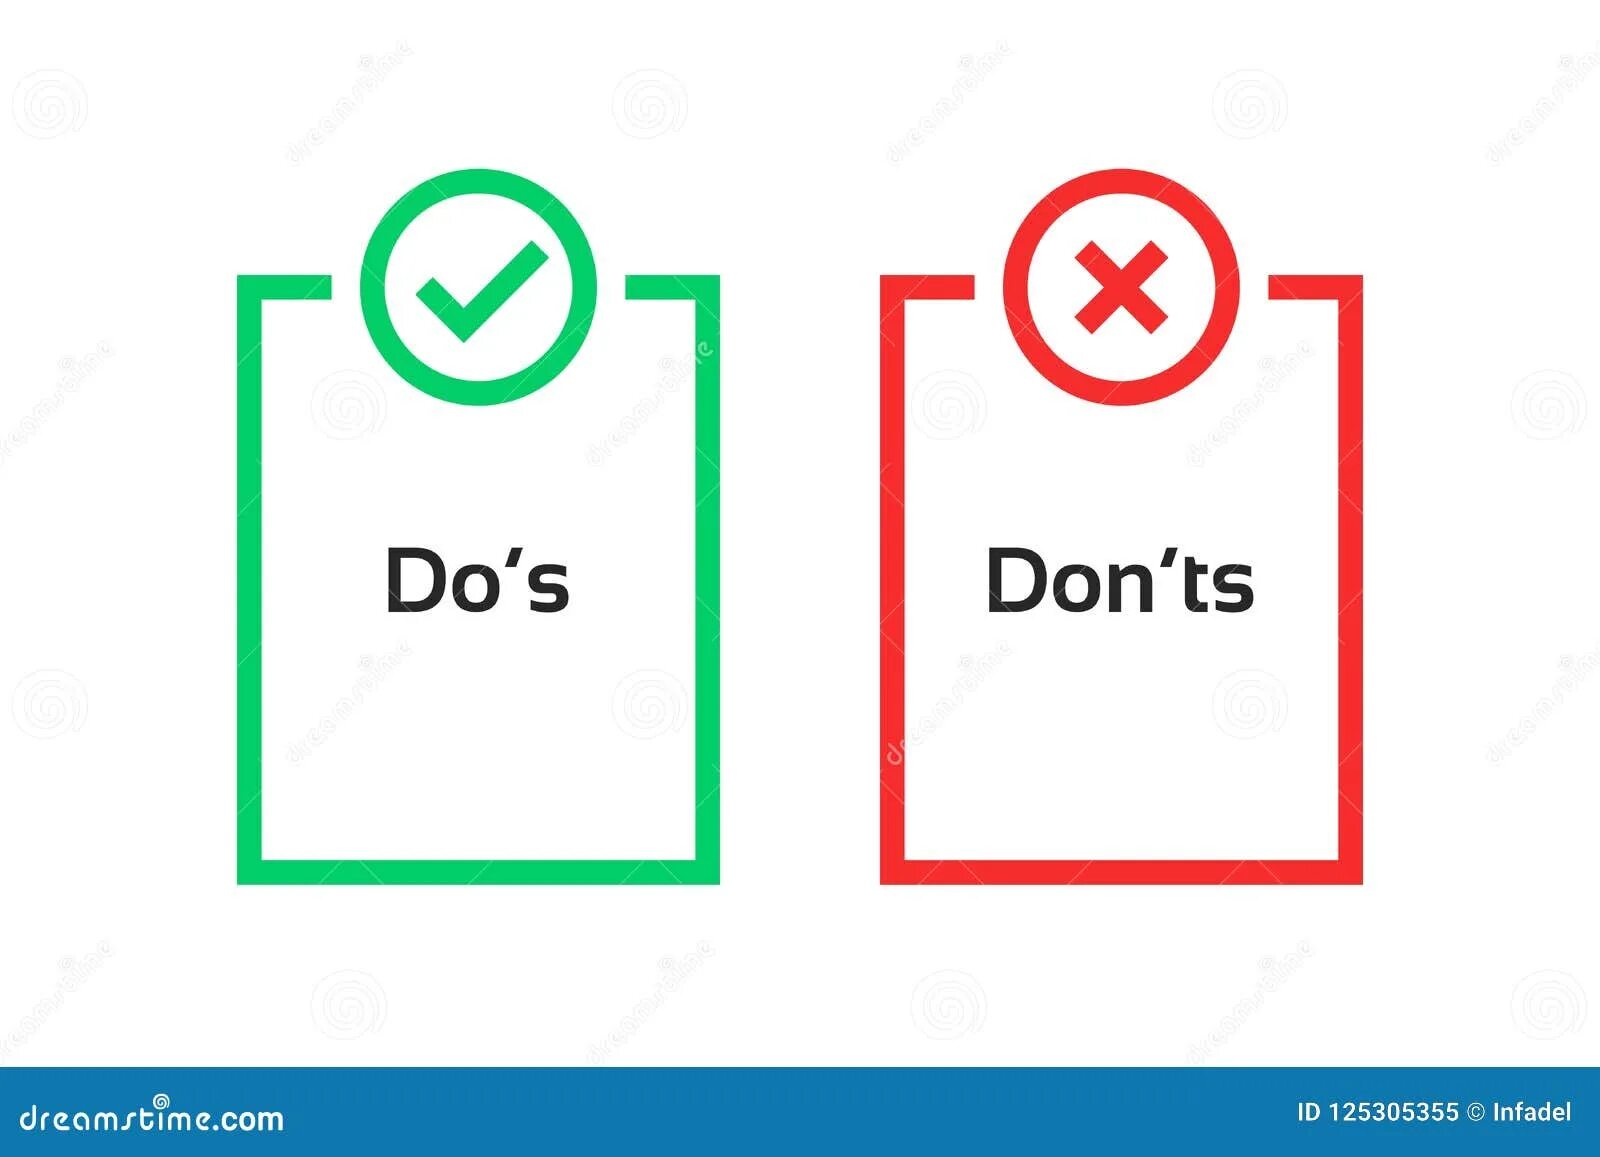 Does and donts. Dos and donts. Шаблон dos donts. Dos and don'TS of logo. Dos & don'TS pictogram.